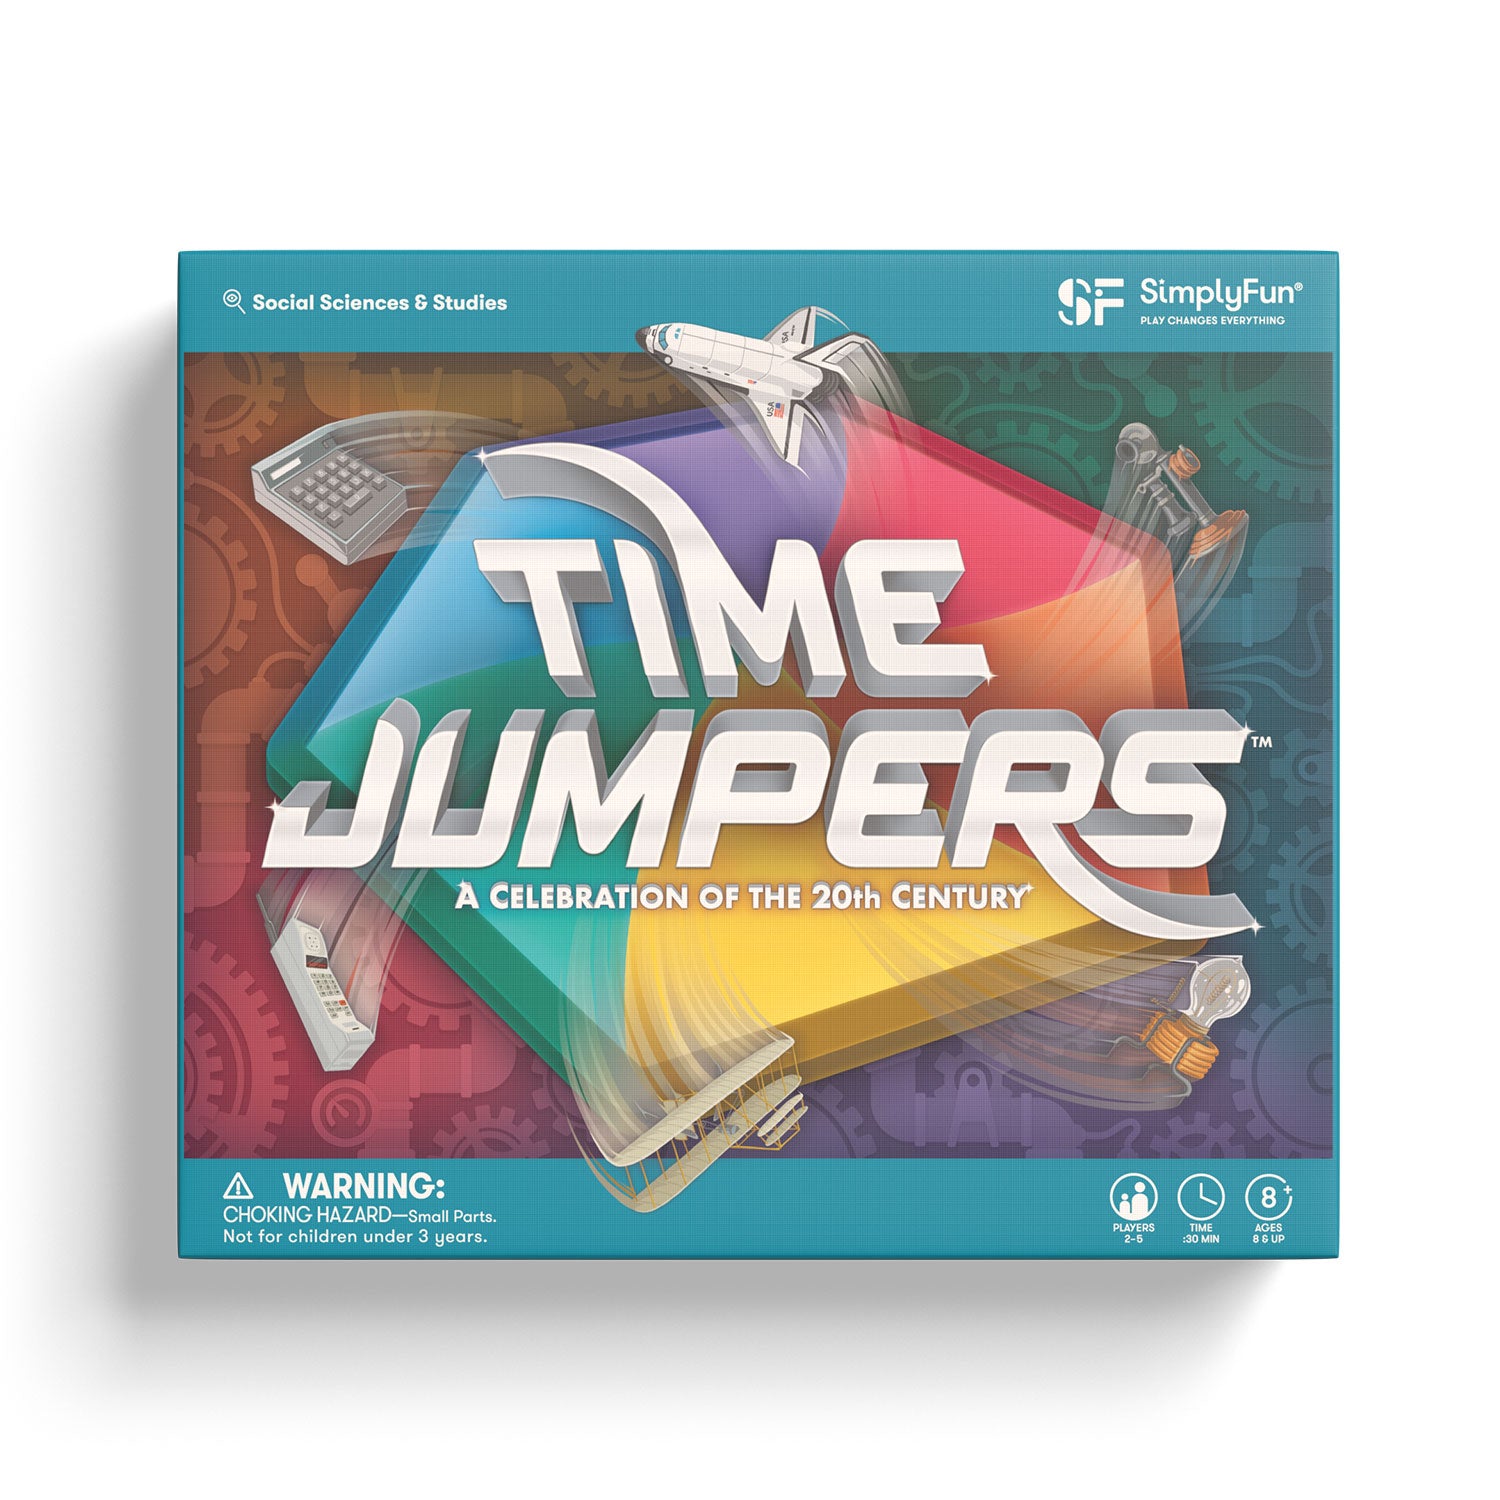 Learn about history and pop culture with SimplyFun’s game Time Jumpers.